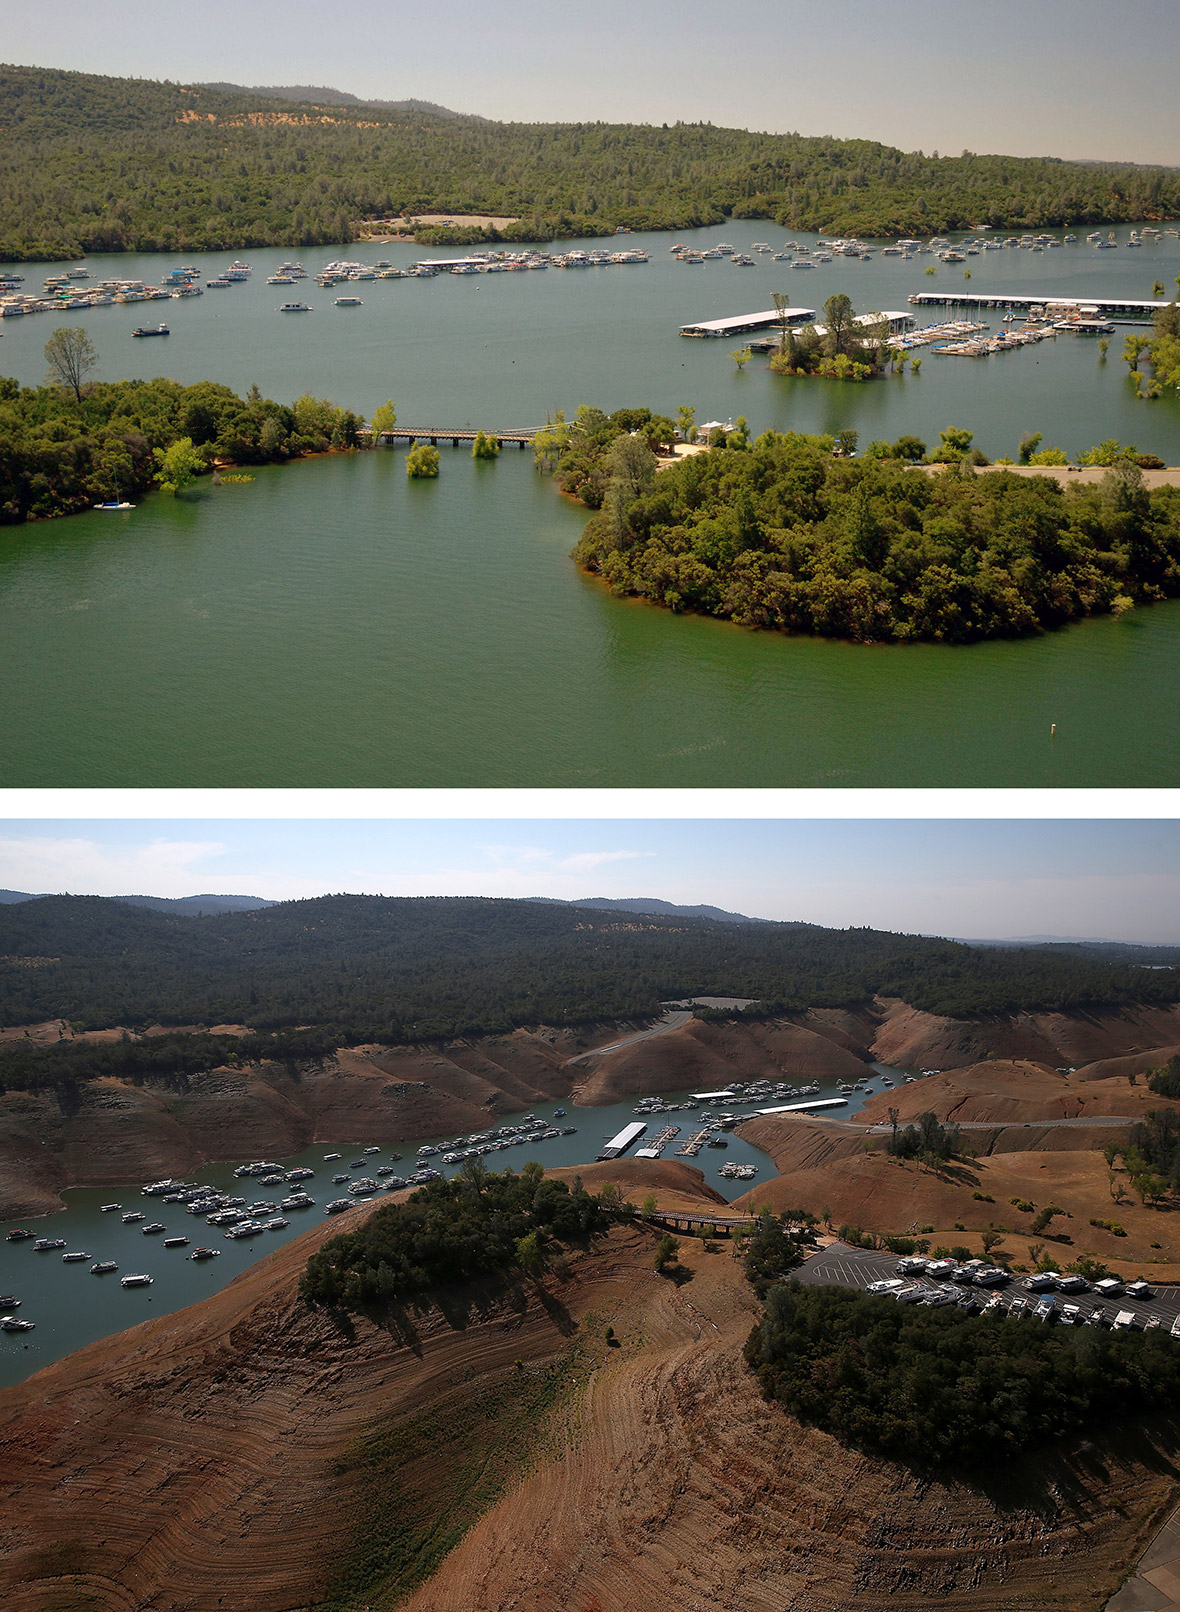 What are California lake's reservoir levels?